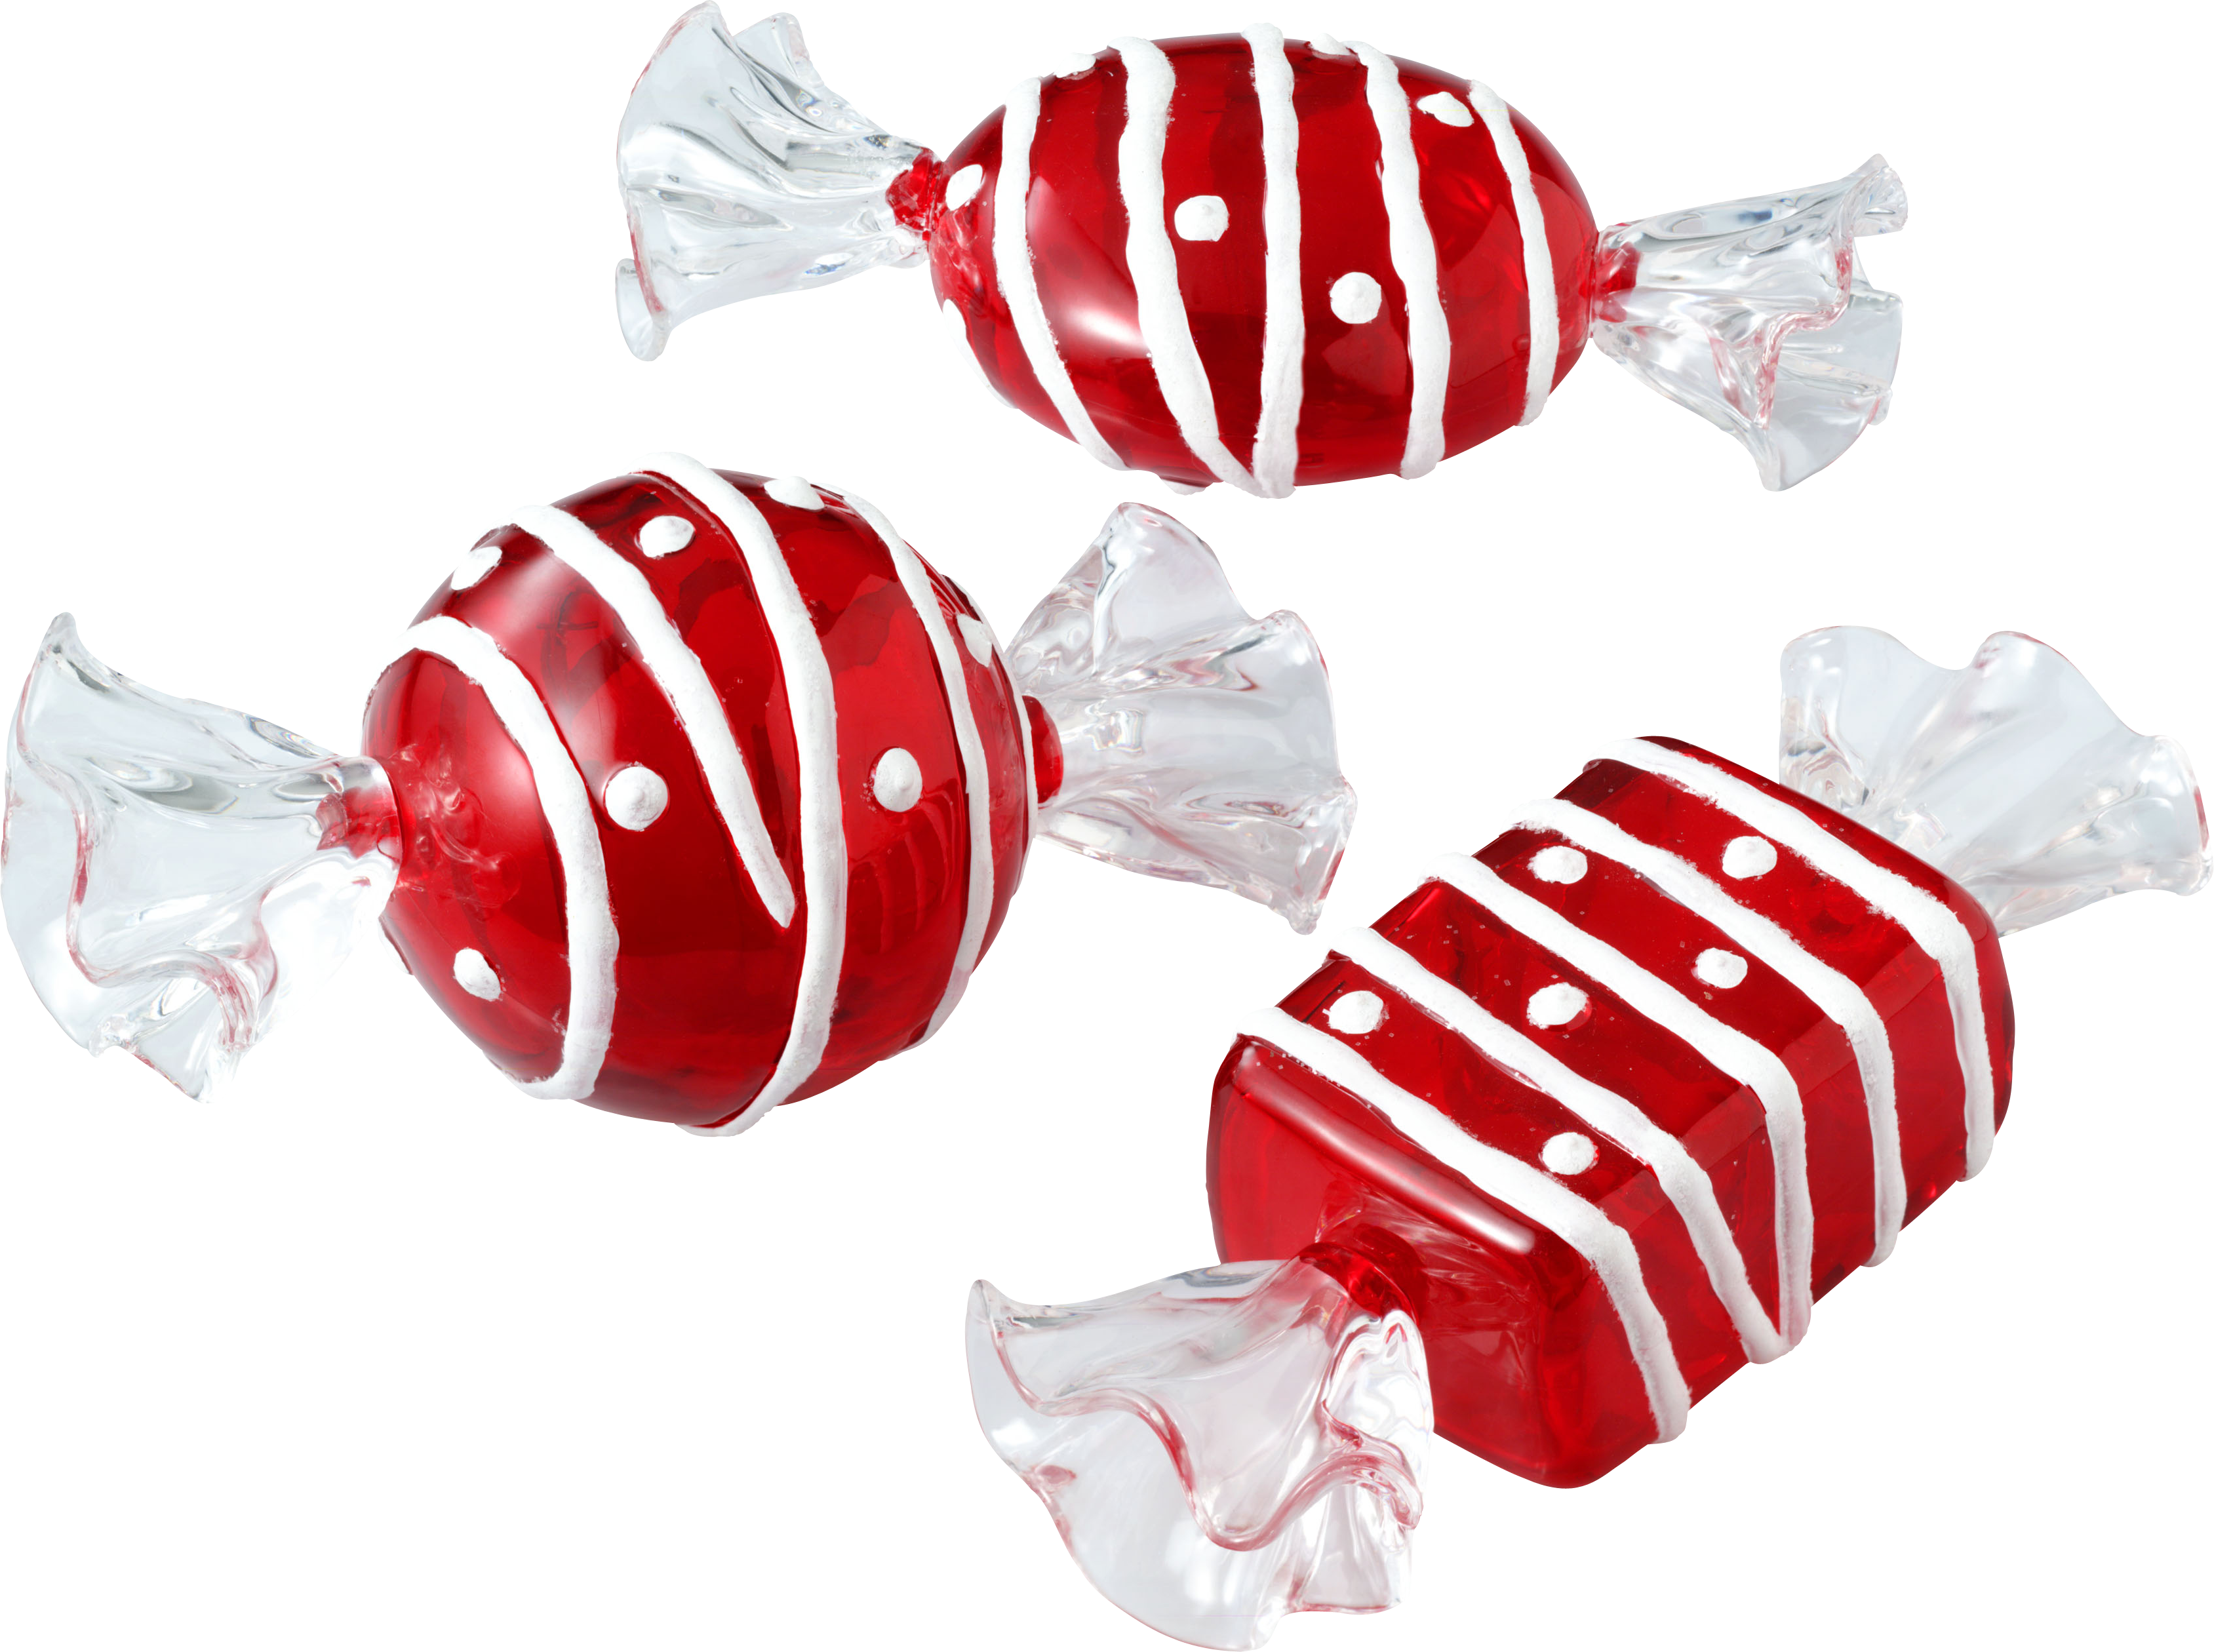 Bonbons PNG images for free download.